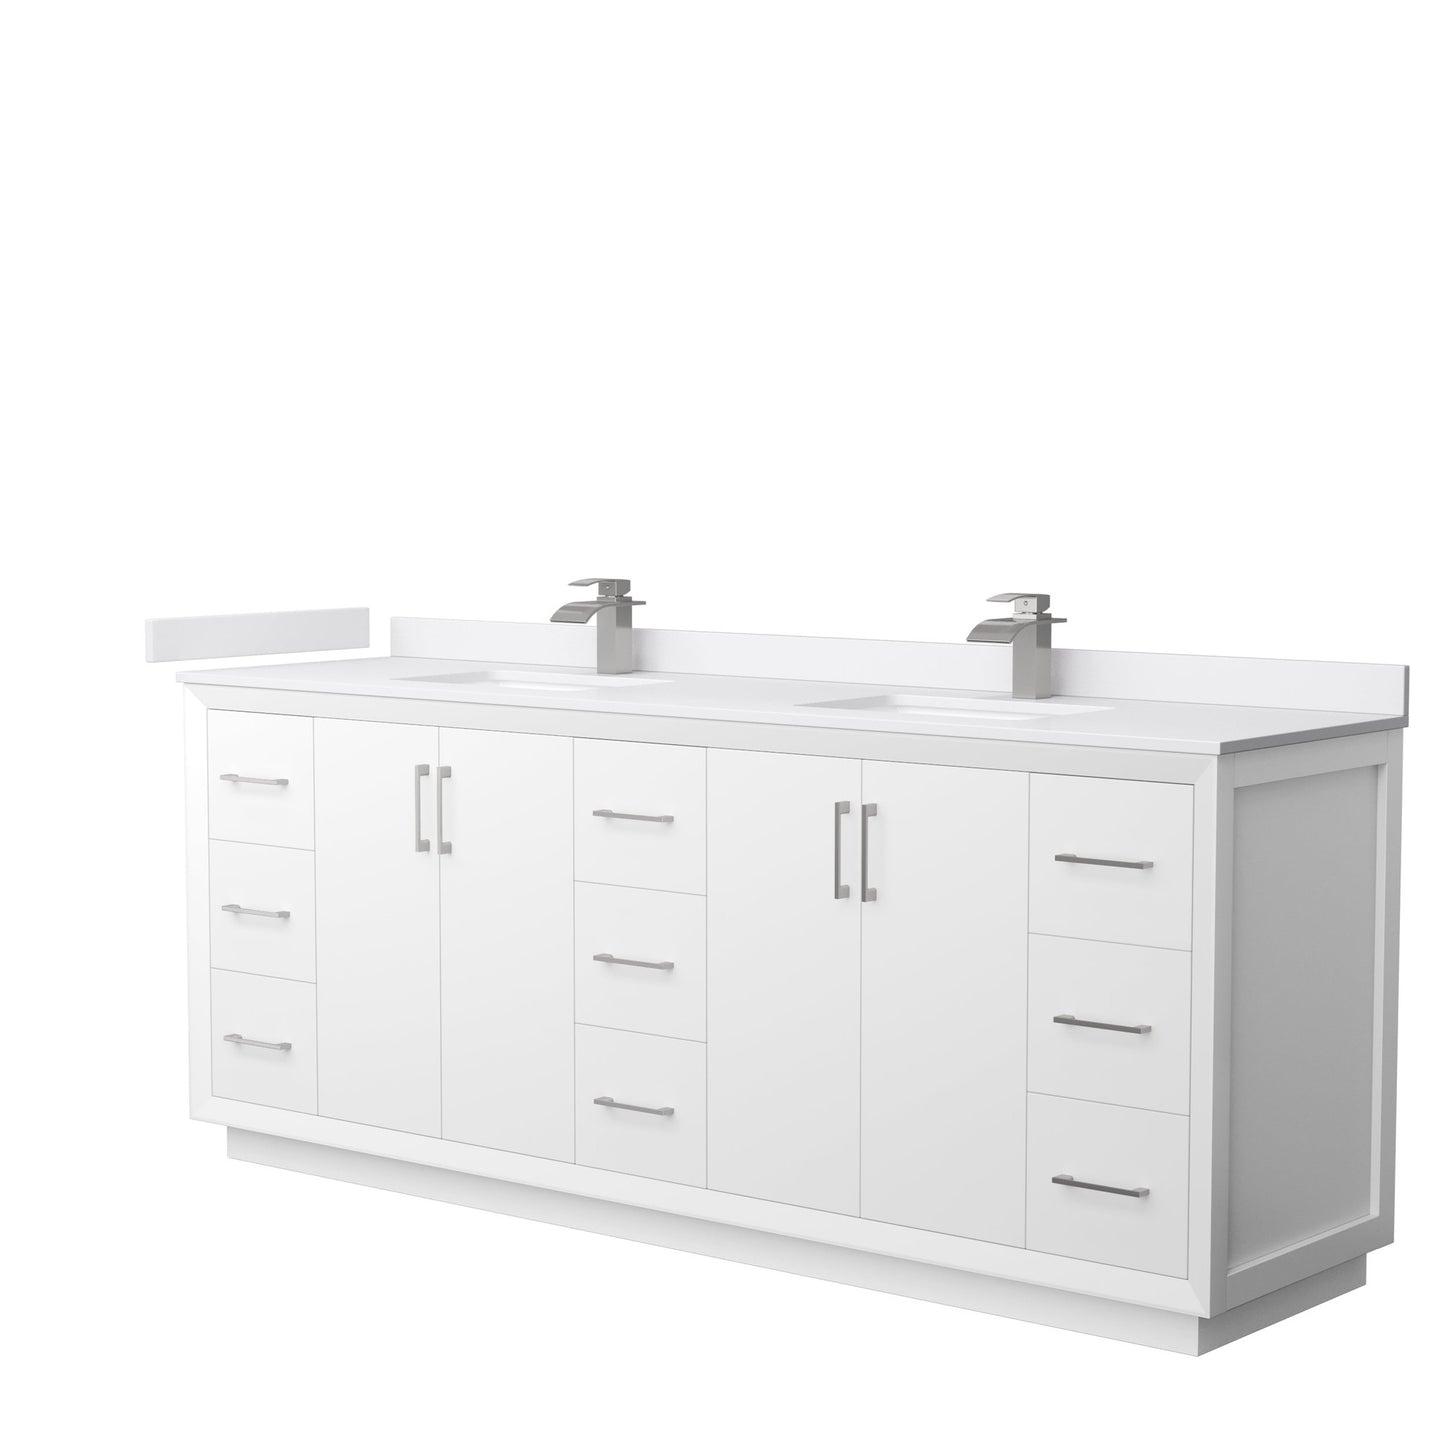 Wyndham Collection Strada 84" Double Bathroom Vanity in White, White Cultured Marble Countertop, Undermount Square Sink, Brushed Nickel Trim